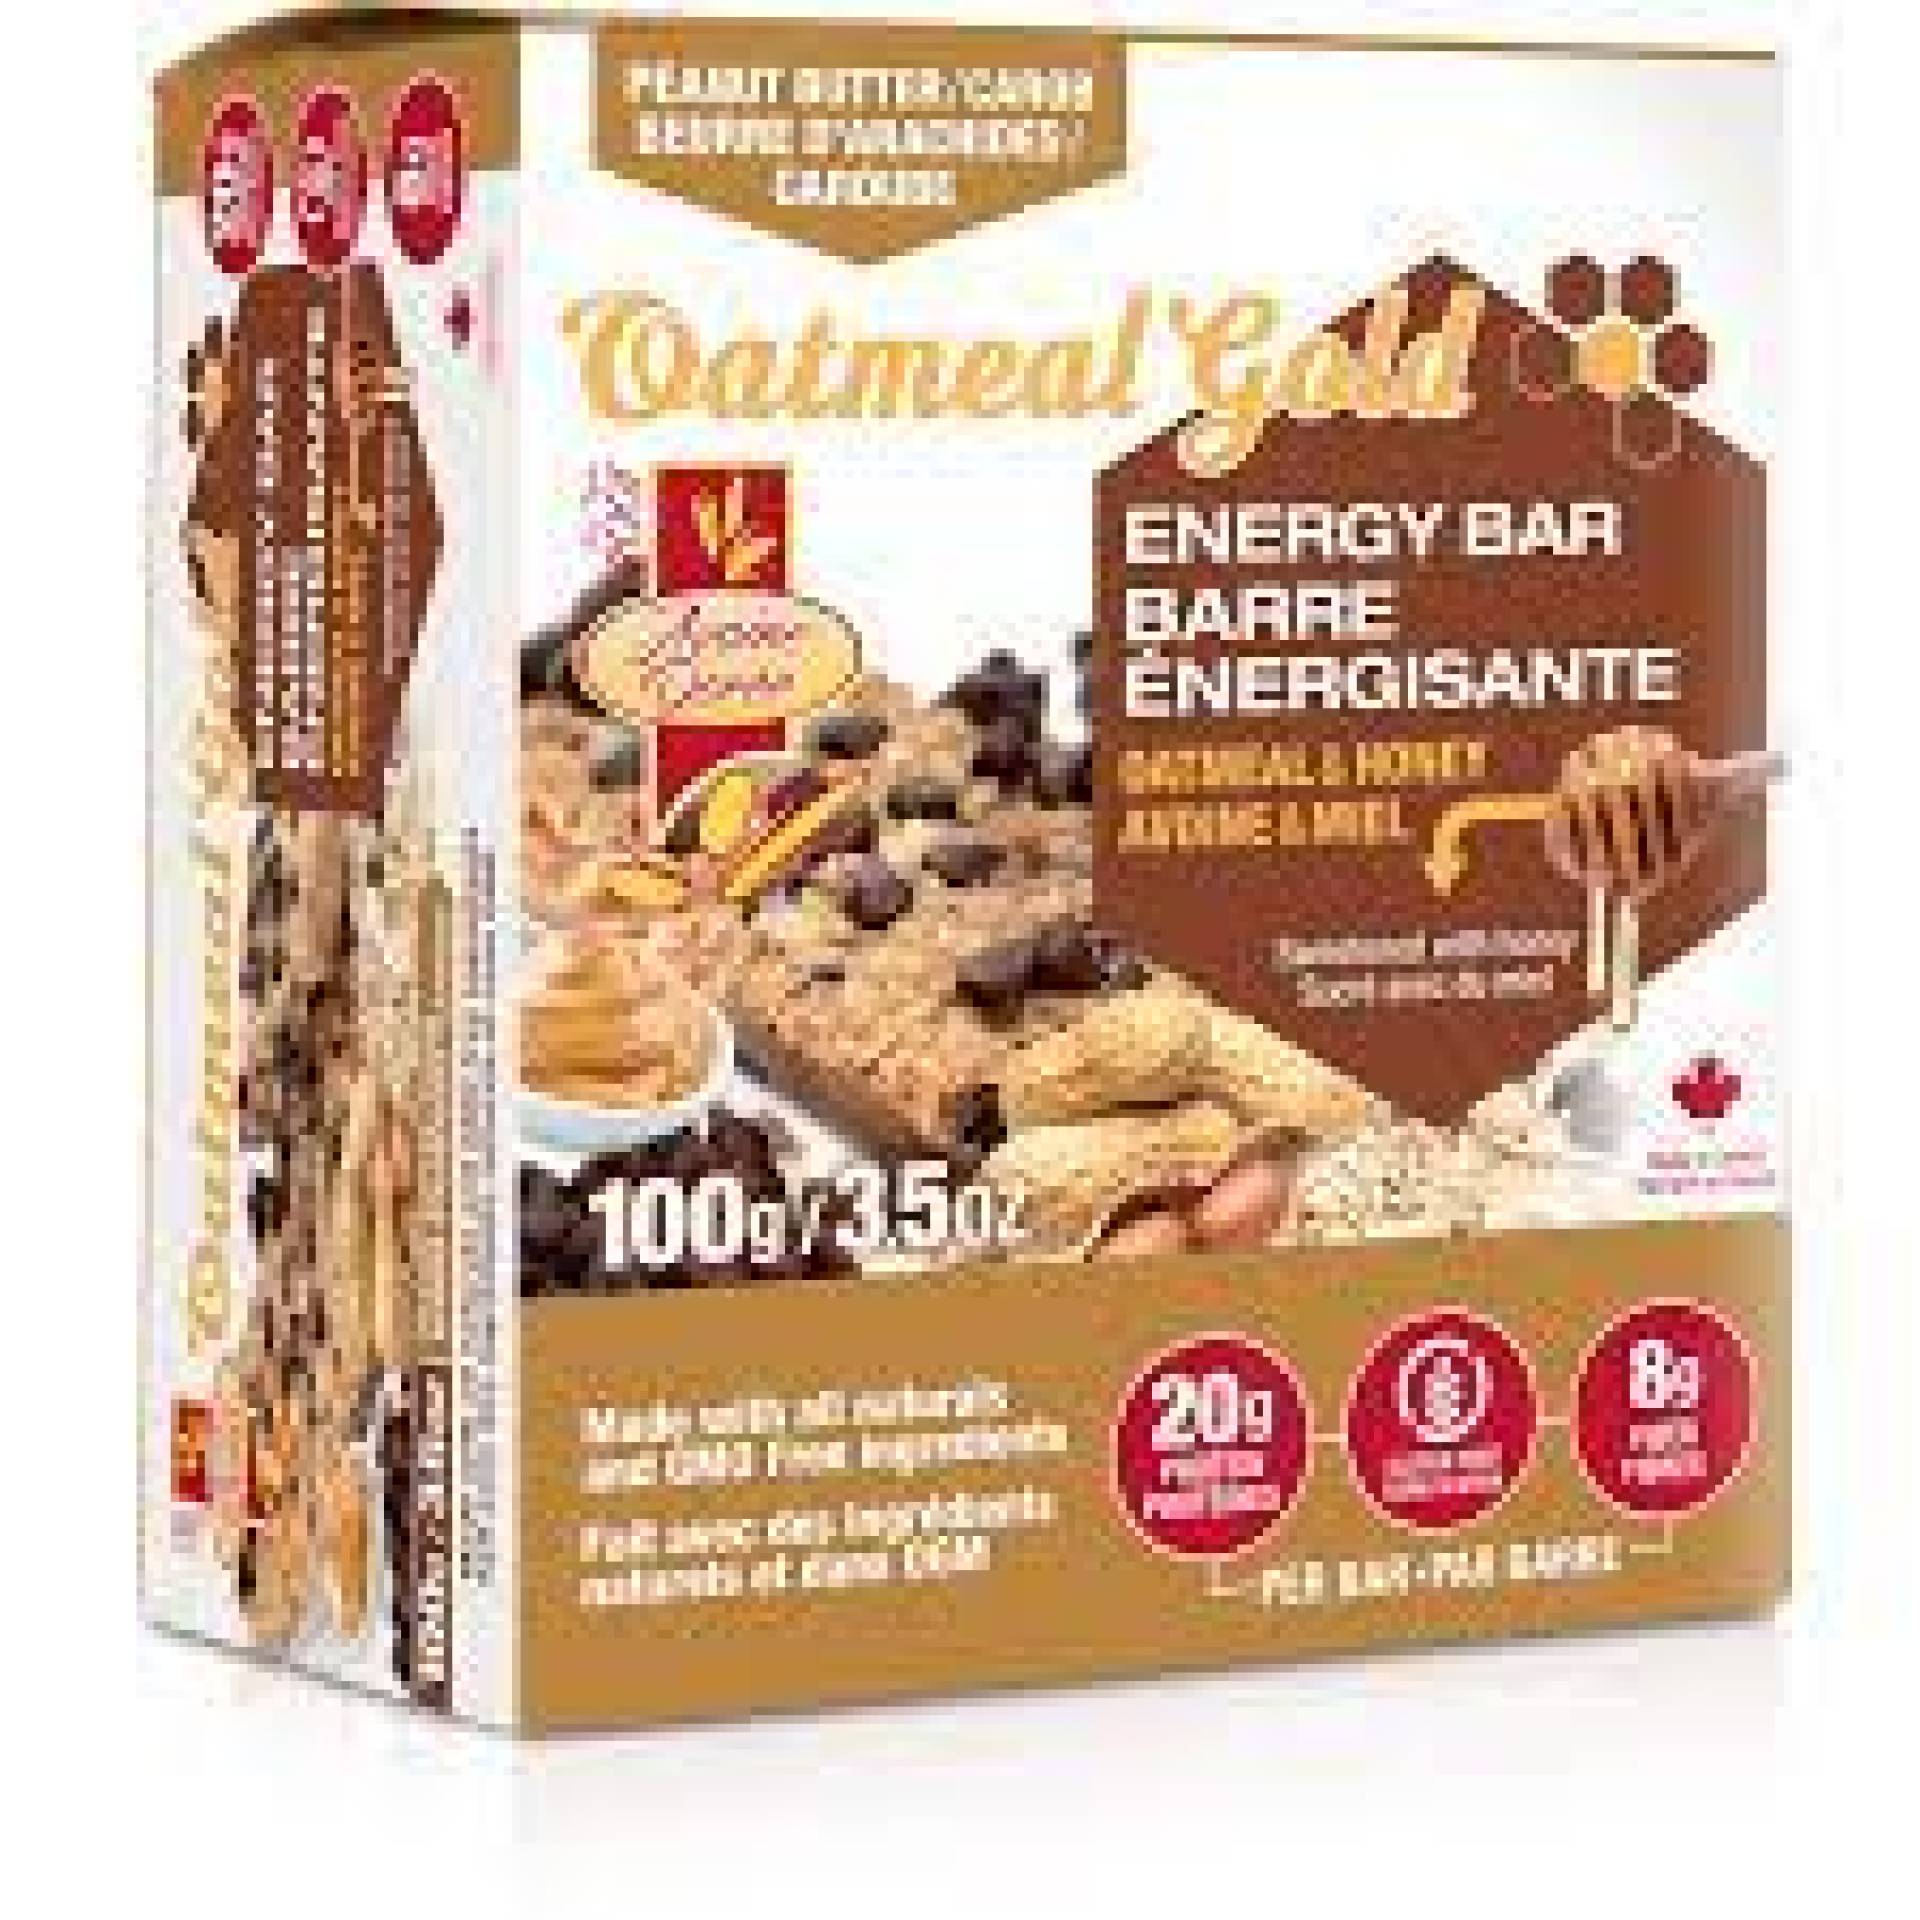 Oatmeal Gold Energy Protein Bars - $3.99